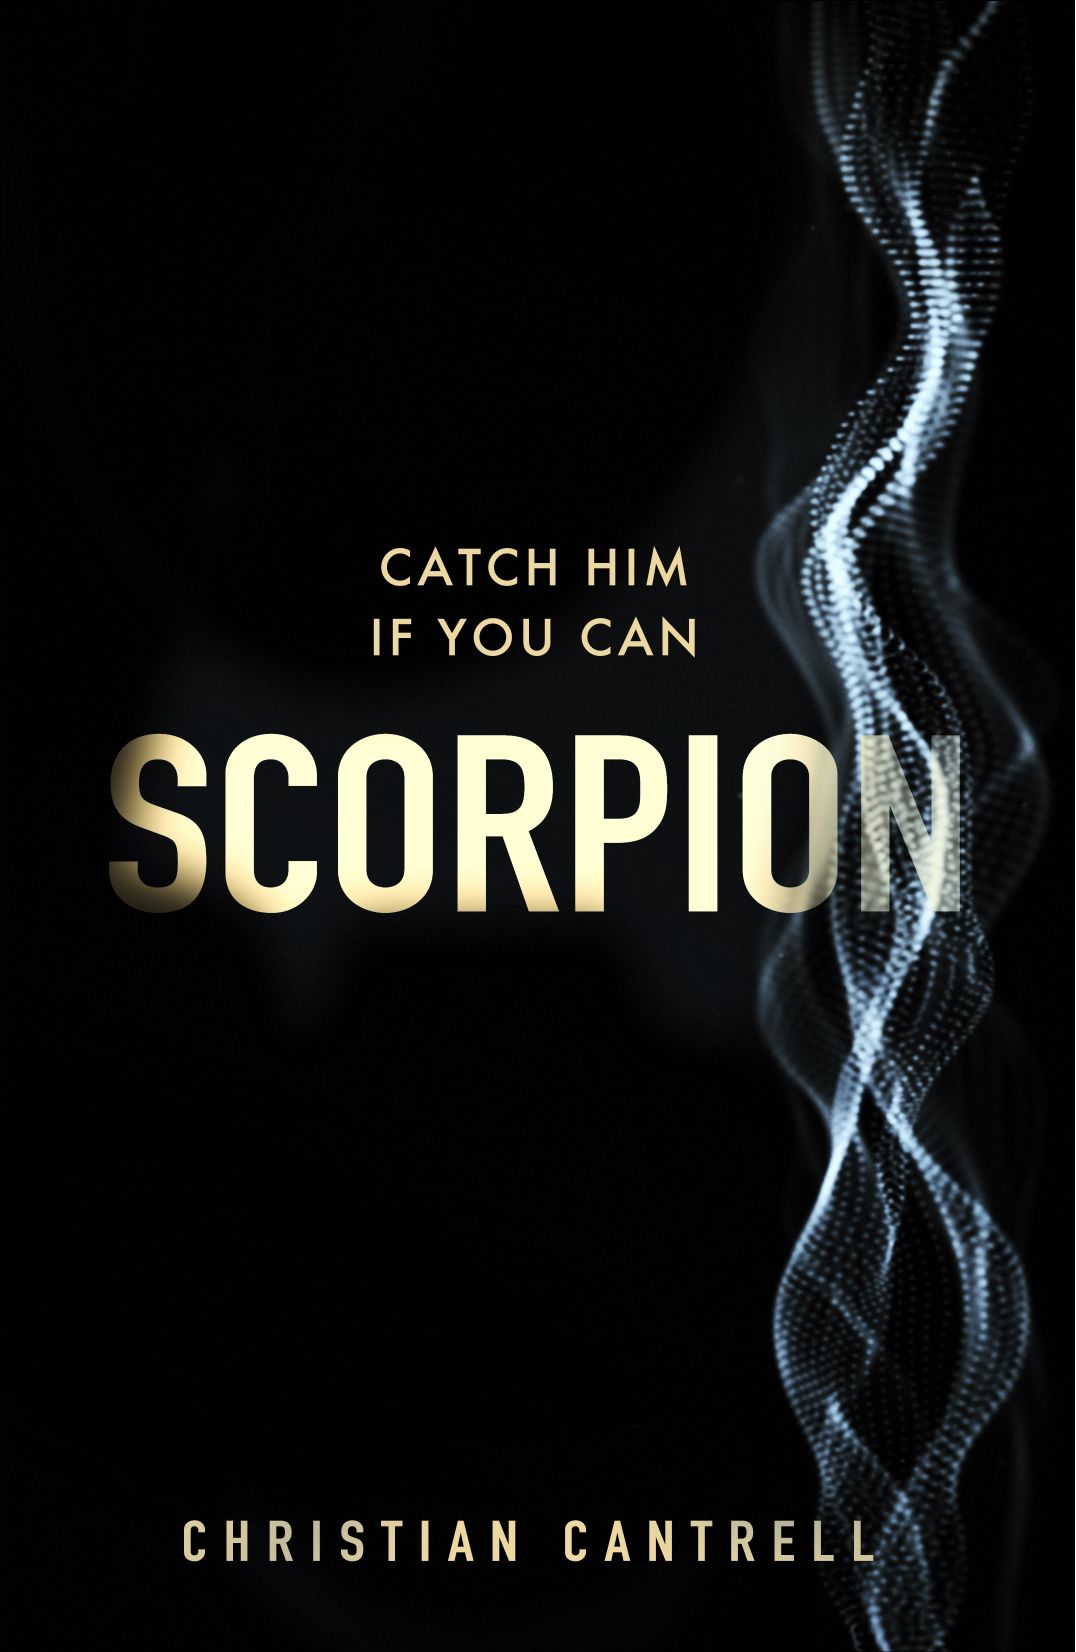 Scorpion by Christian Cantrell - City Books & Lotto